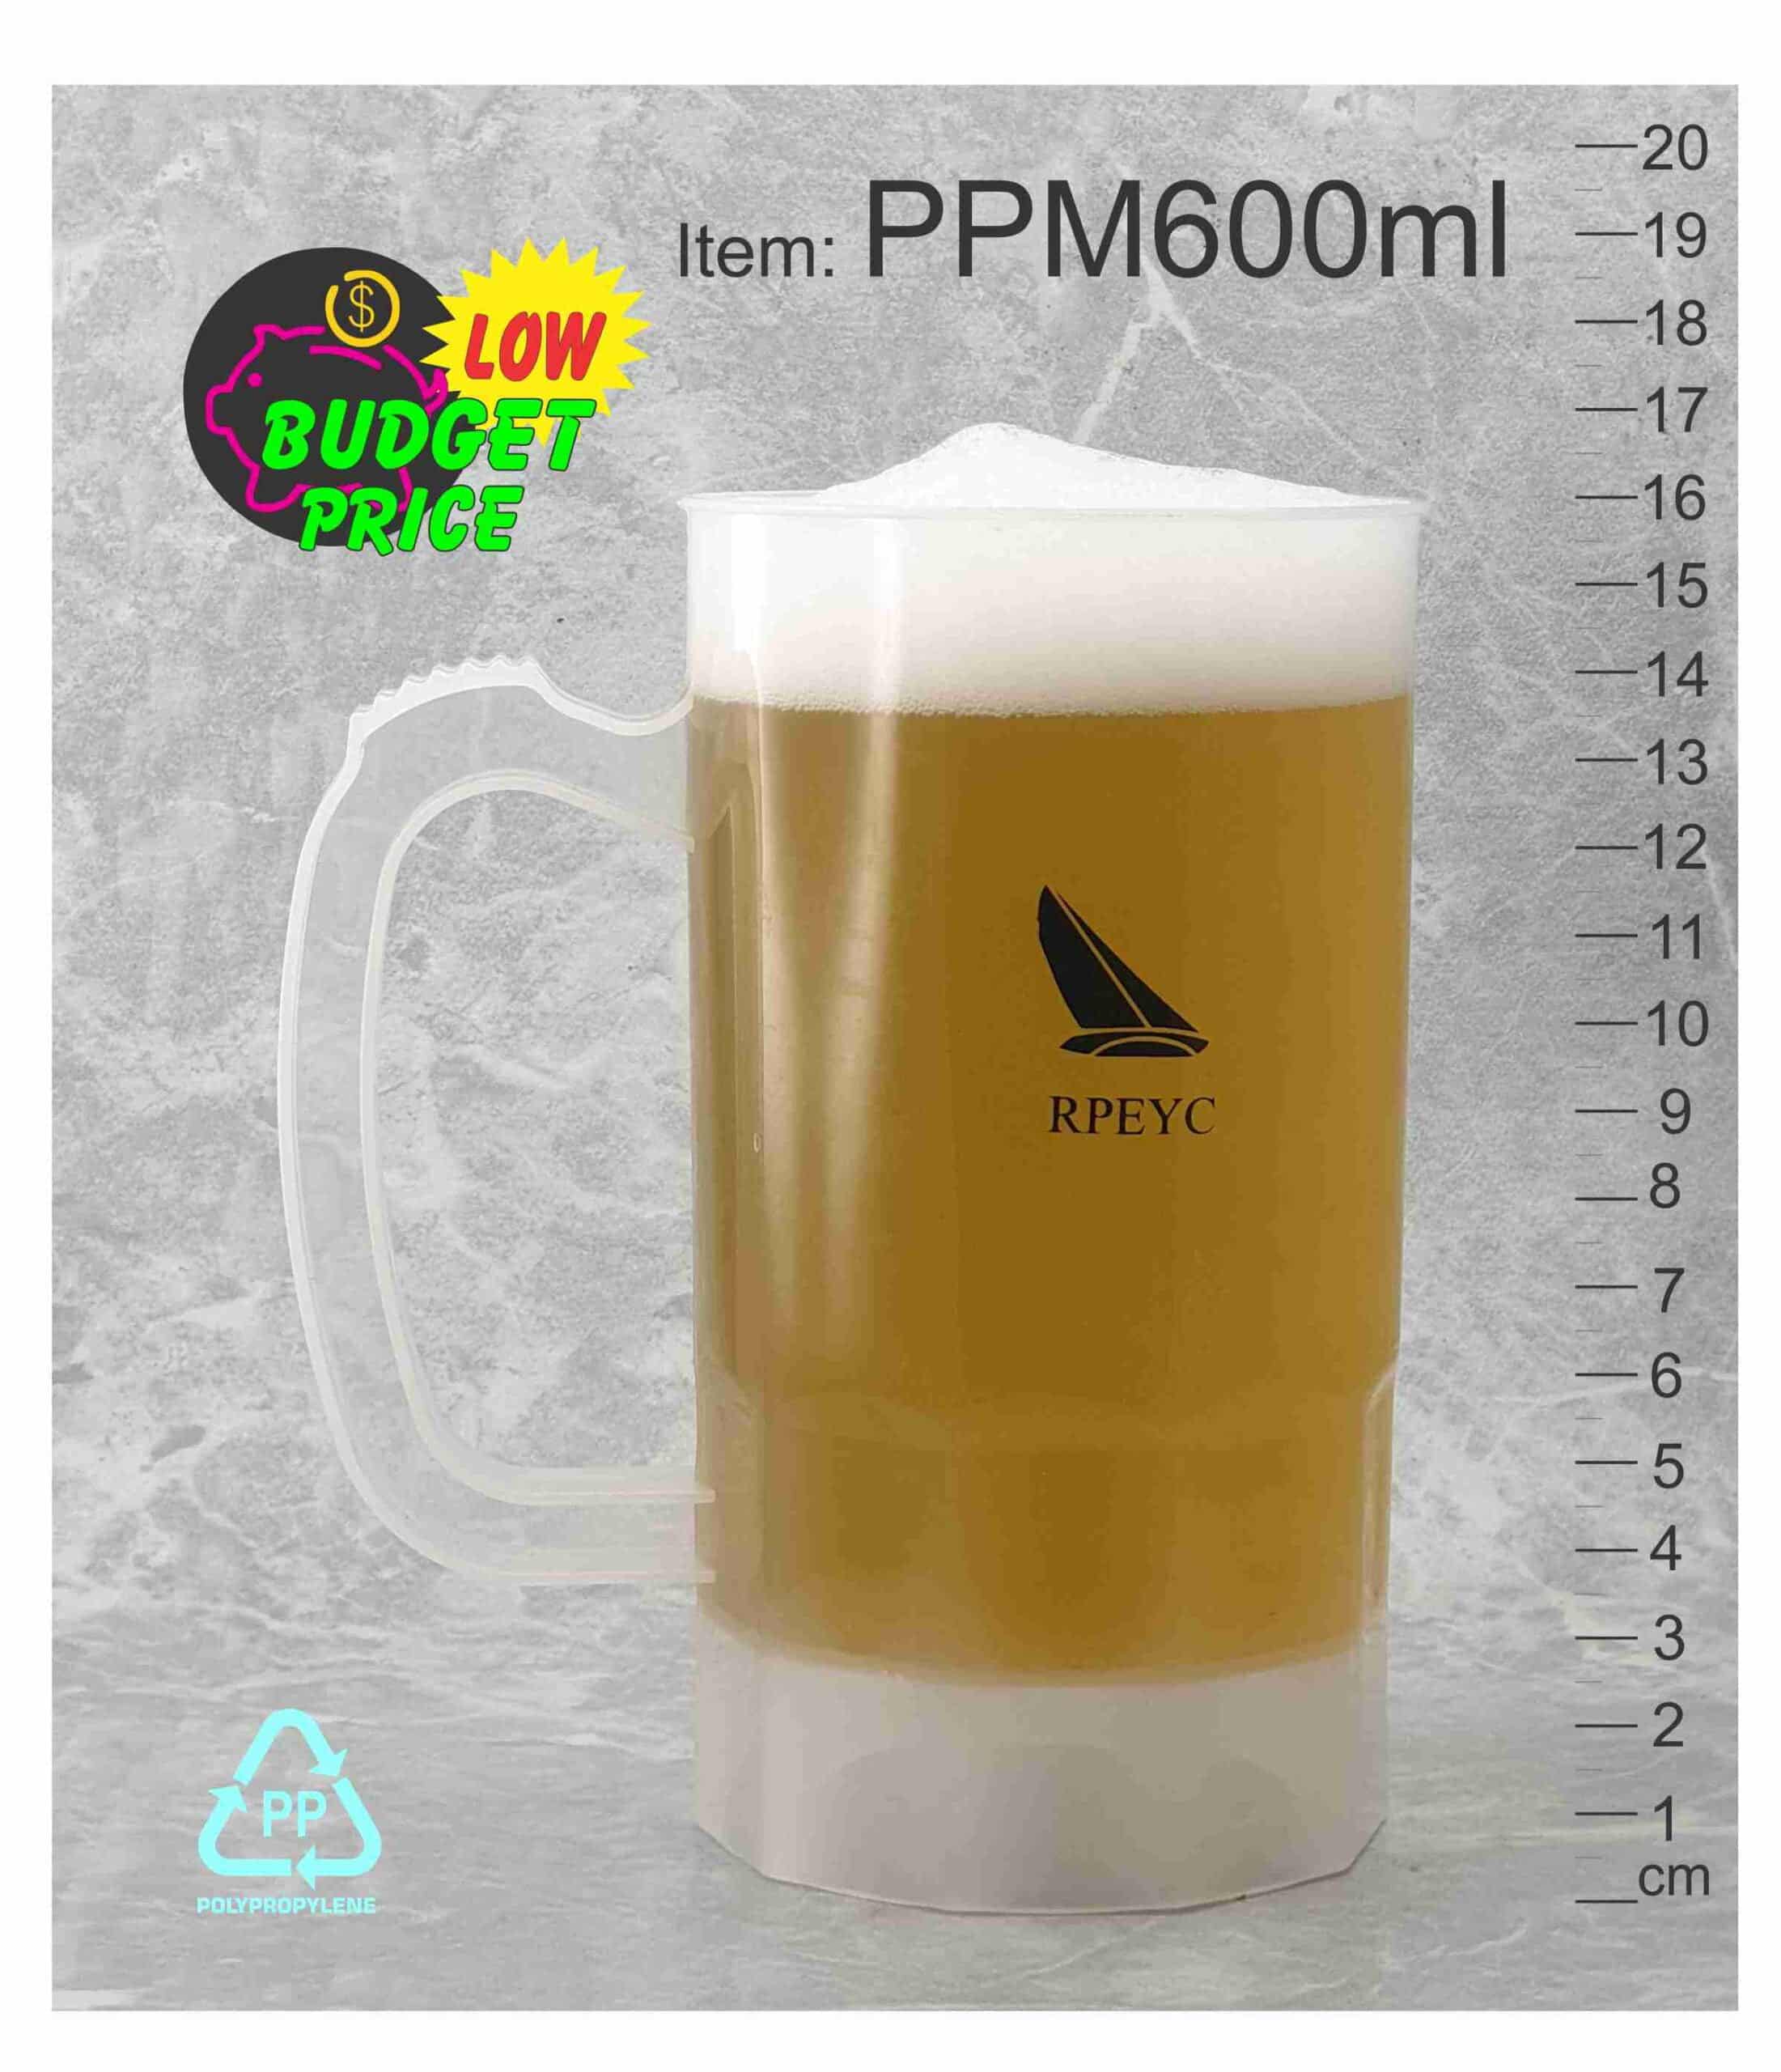 PPM600 reusable custom printed festival events party stein mug unbreakable plastic drinking beer pot glasses cups abc2000 Australia scaled